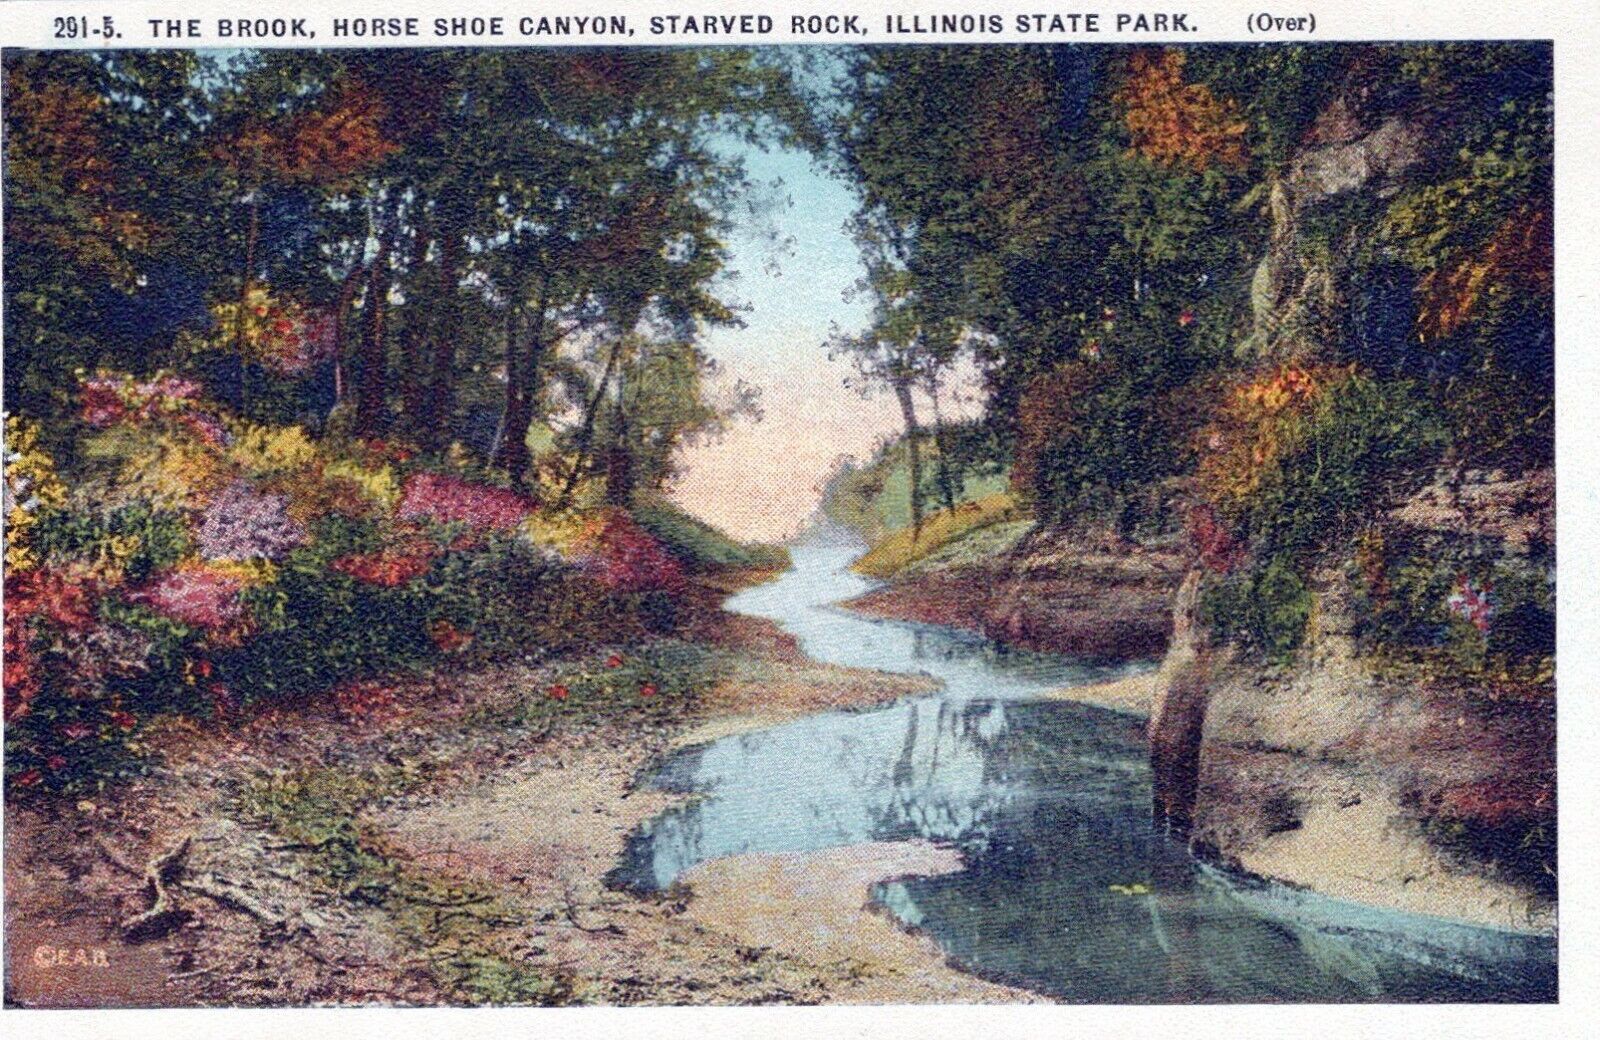 The Brook Horse Shoe Canyon Starved Rock IL Park Vintage White Border Post Card